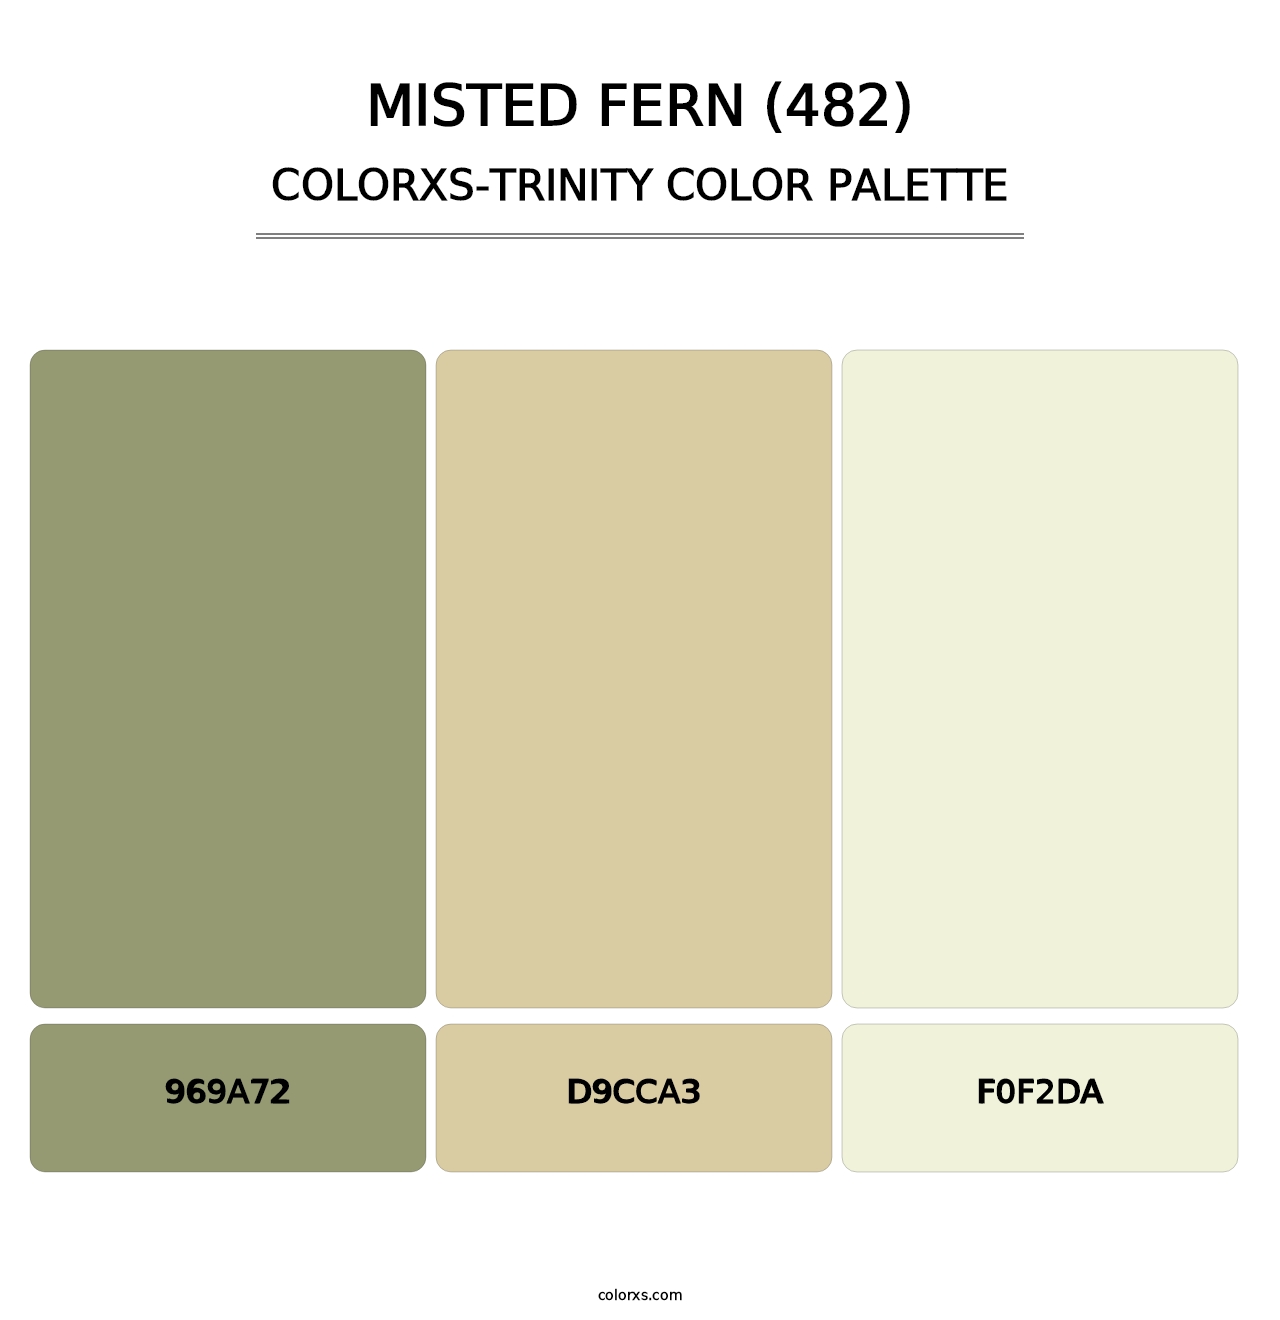 Misted Fern (482) - Colorxs Trinity Palette